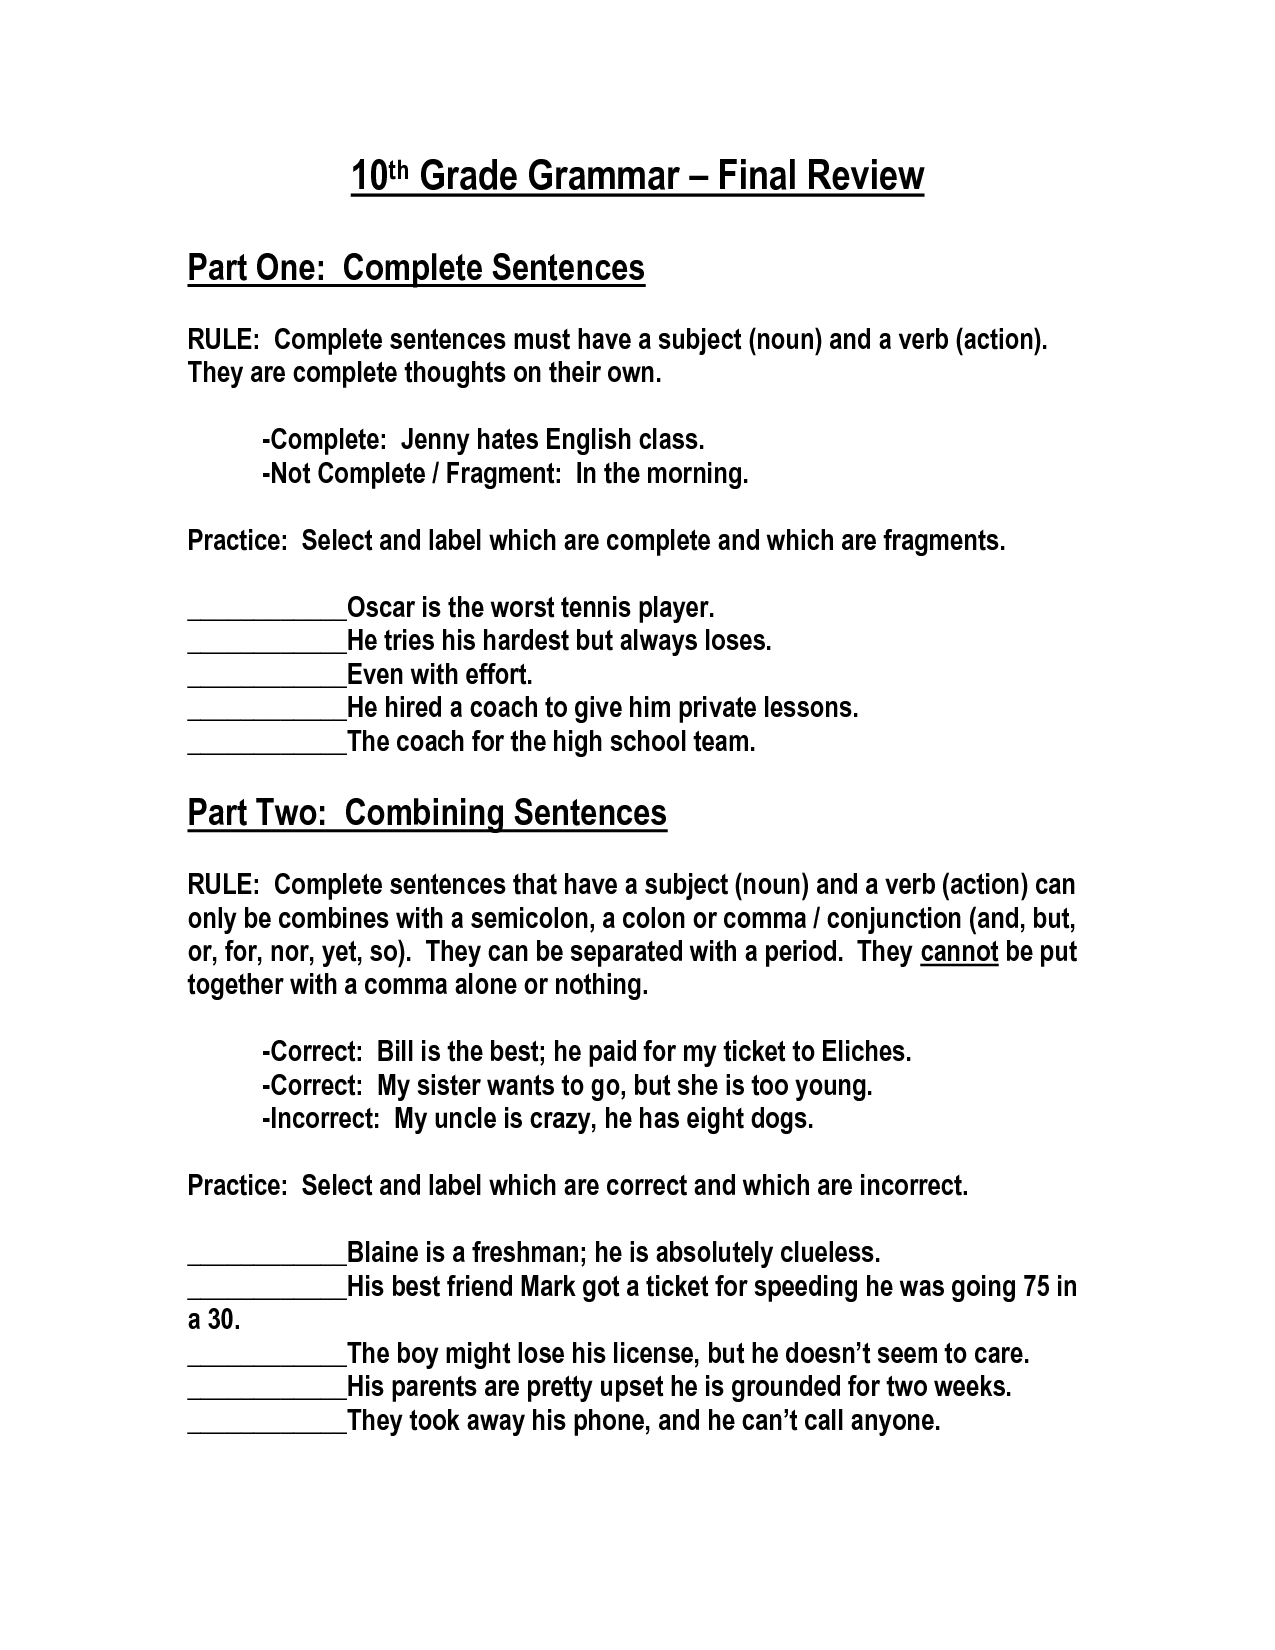 16 Best Images of Fall Worksheets For 5th Grade  5th Grade Halloween Math Worksheets, Halloween 